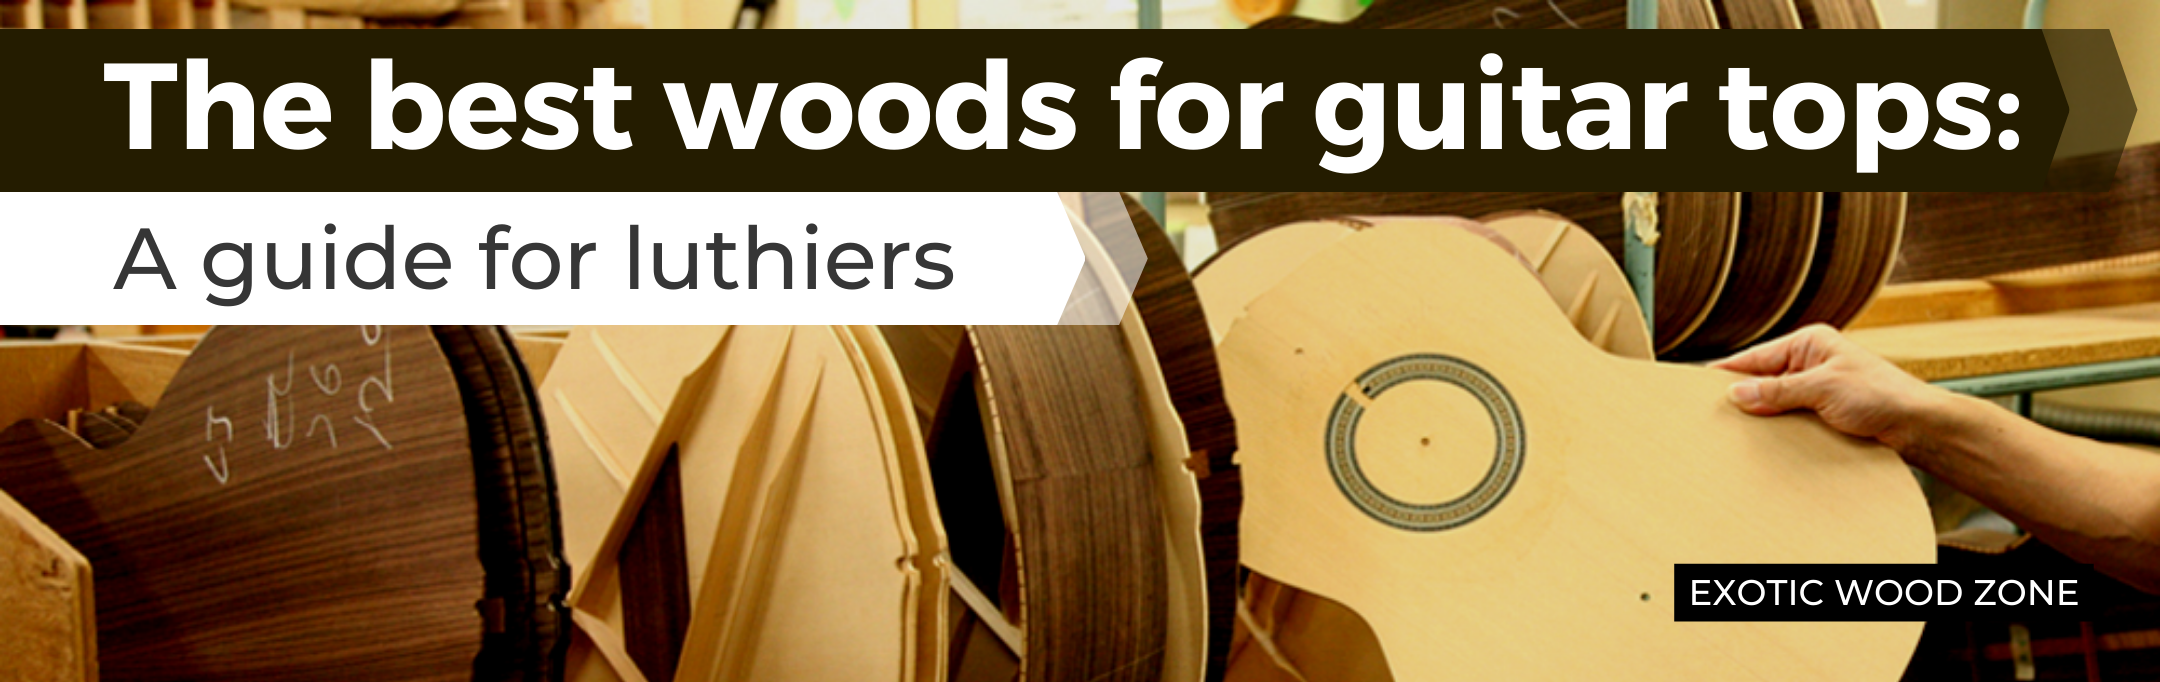 The Best Woods for Guitar Tops: A Guide for Guitar Makers